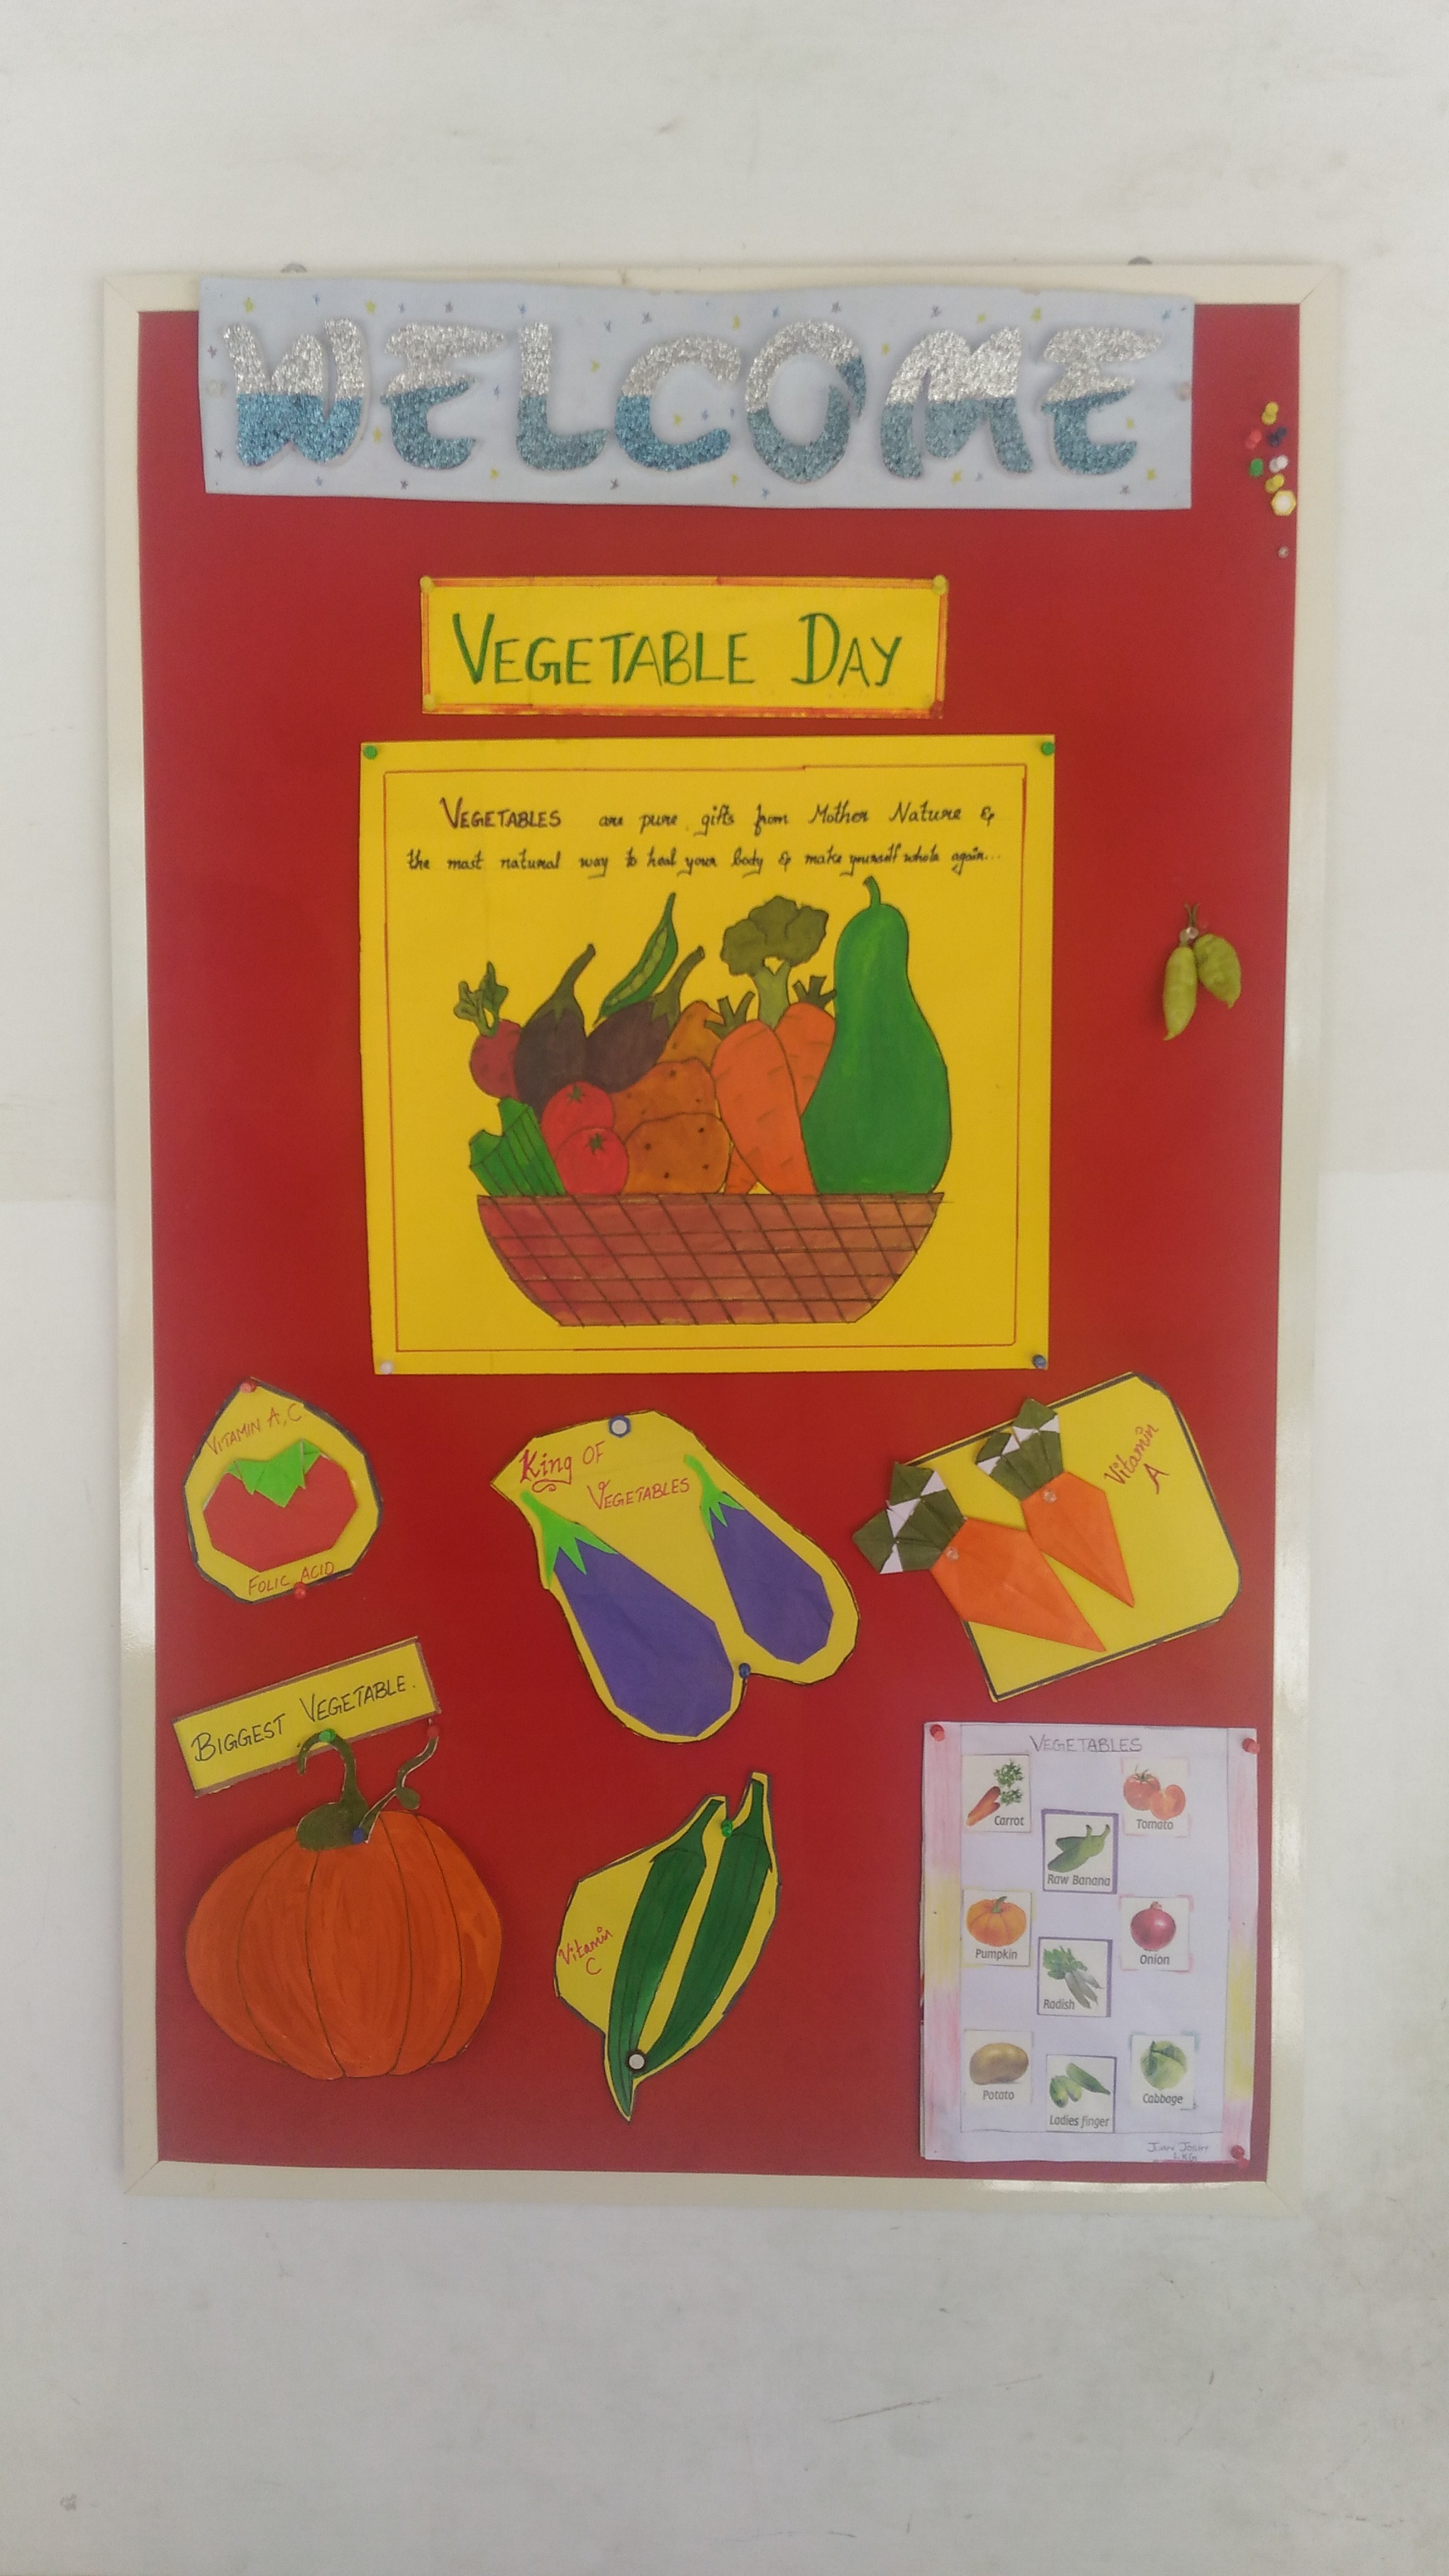 VEGETABLE DAY